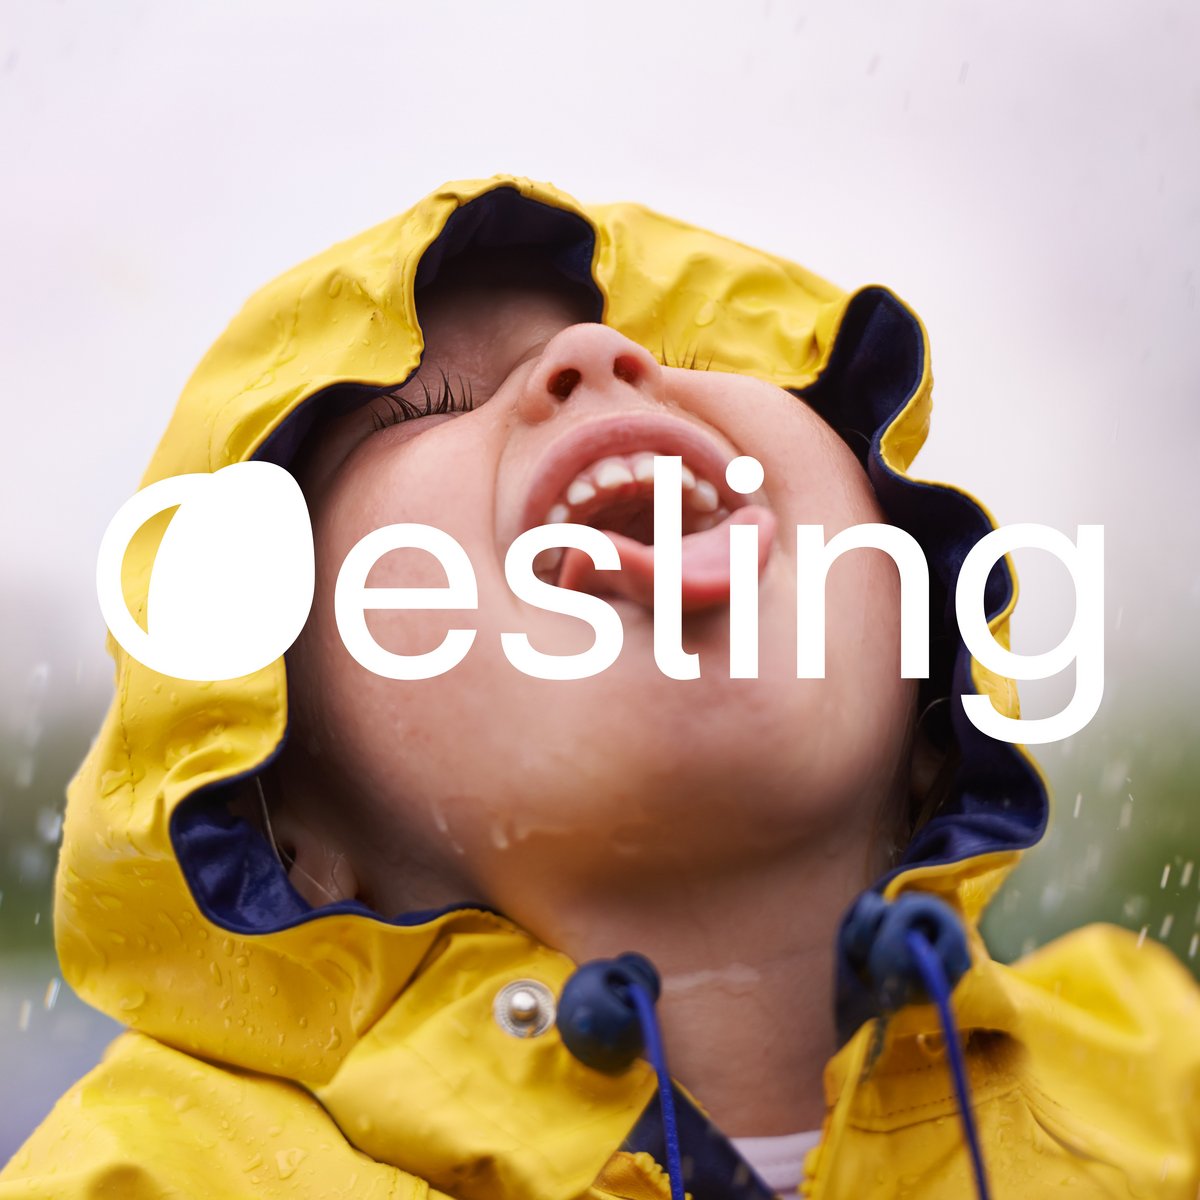 A toddler in the rain with a yellow rain jacket and sticking out his tongue